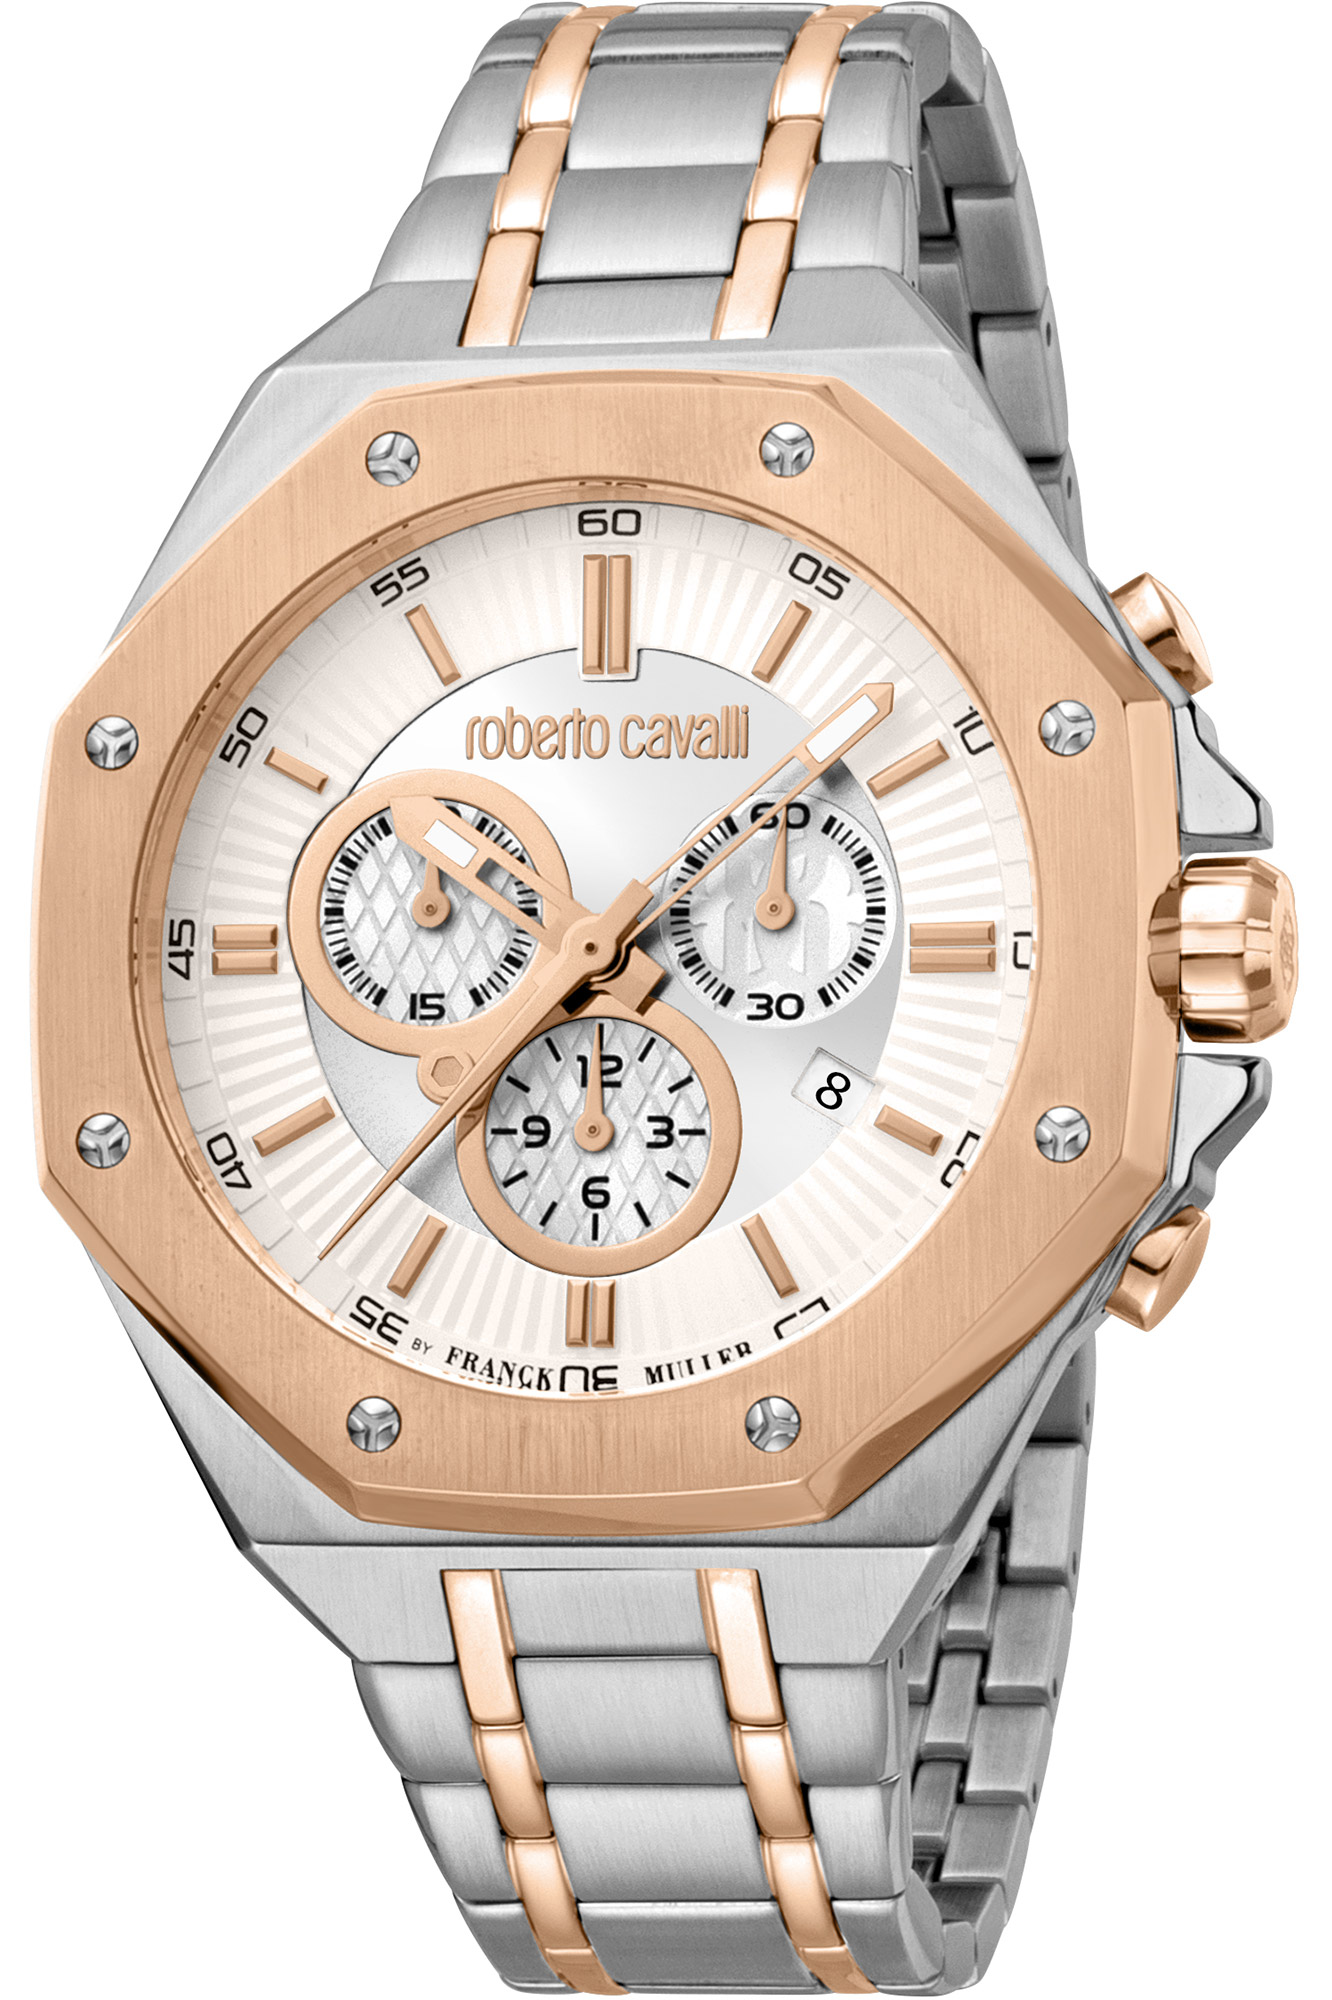 Roberto Cavalli by Franck MullerRV1G123M0061 - Aion Time